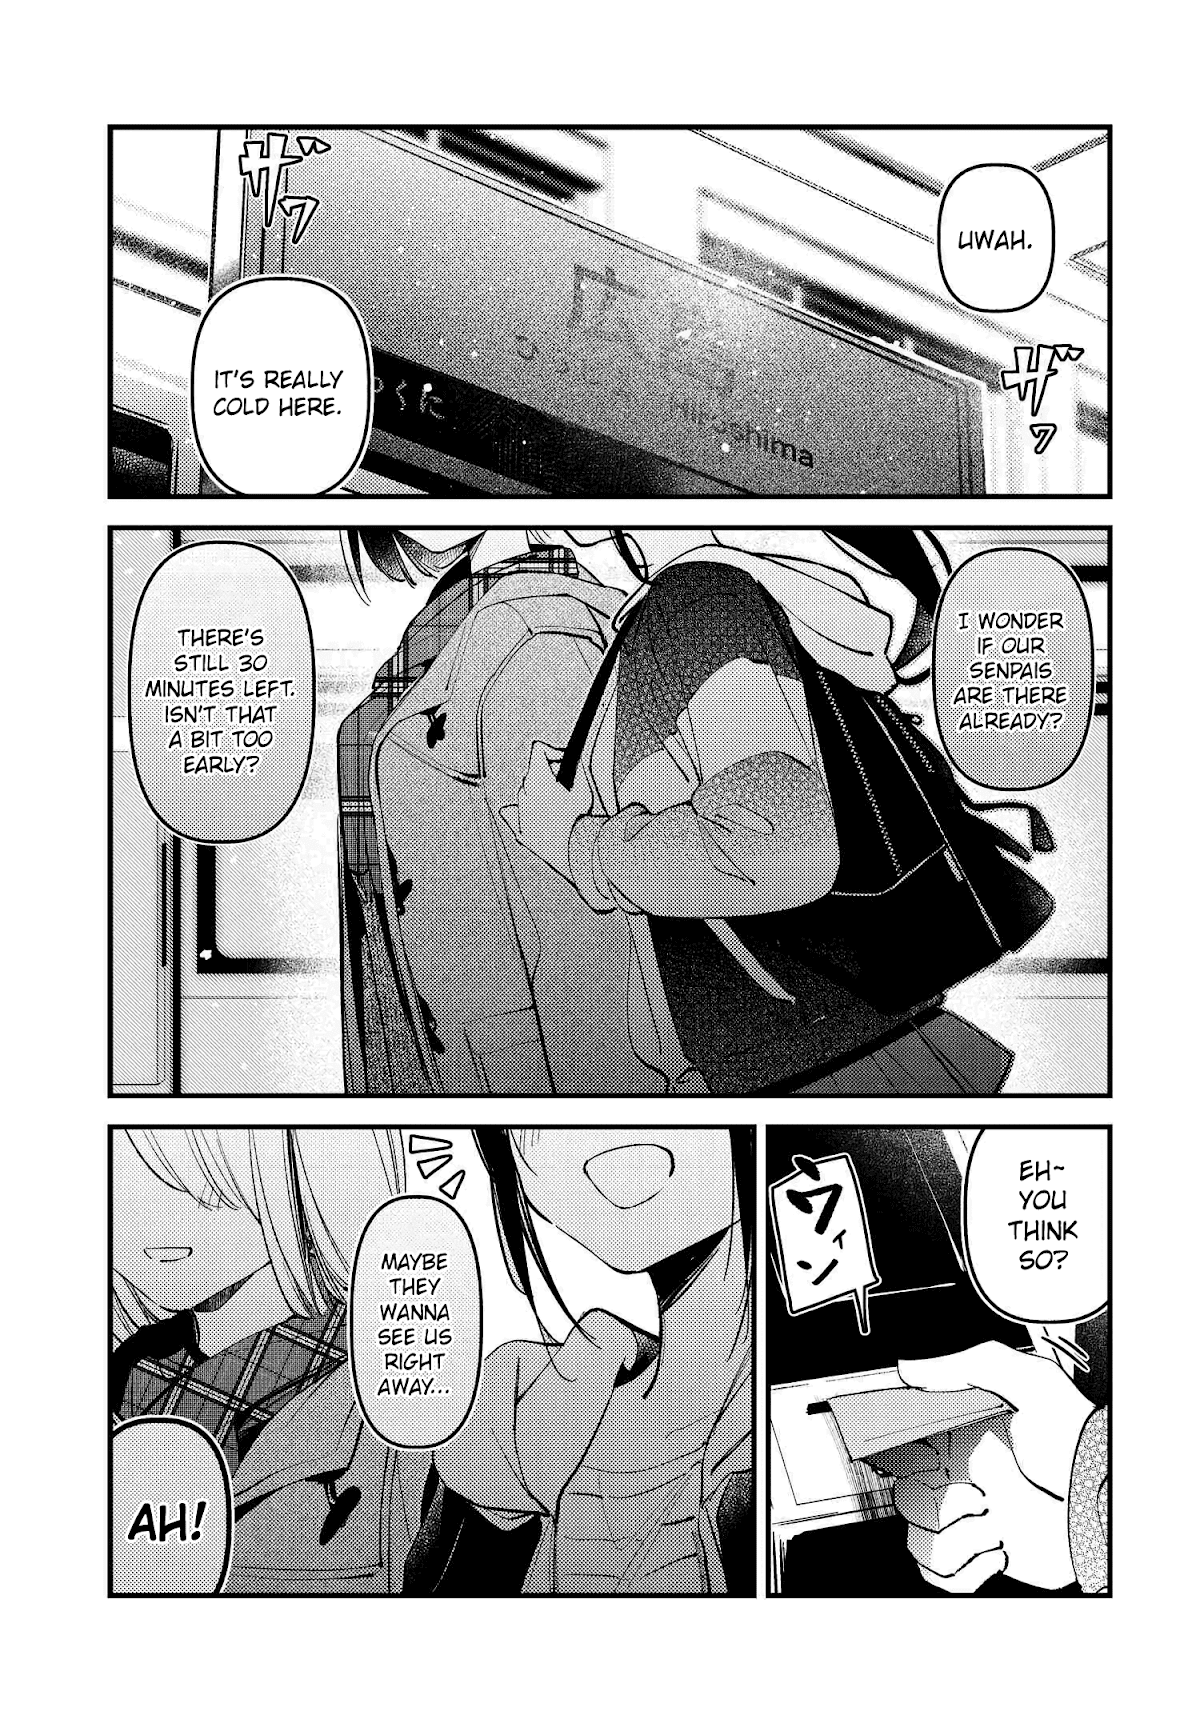 Take Responsibility For My Stomach! - Page 1